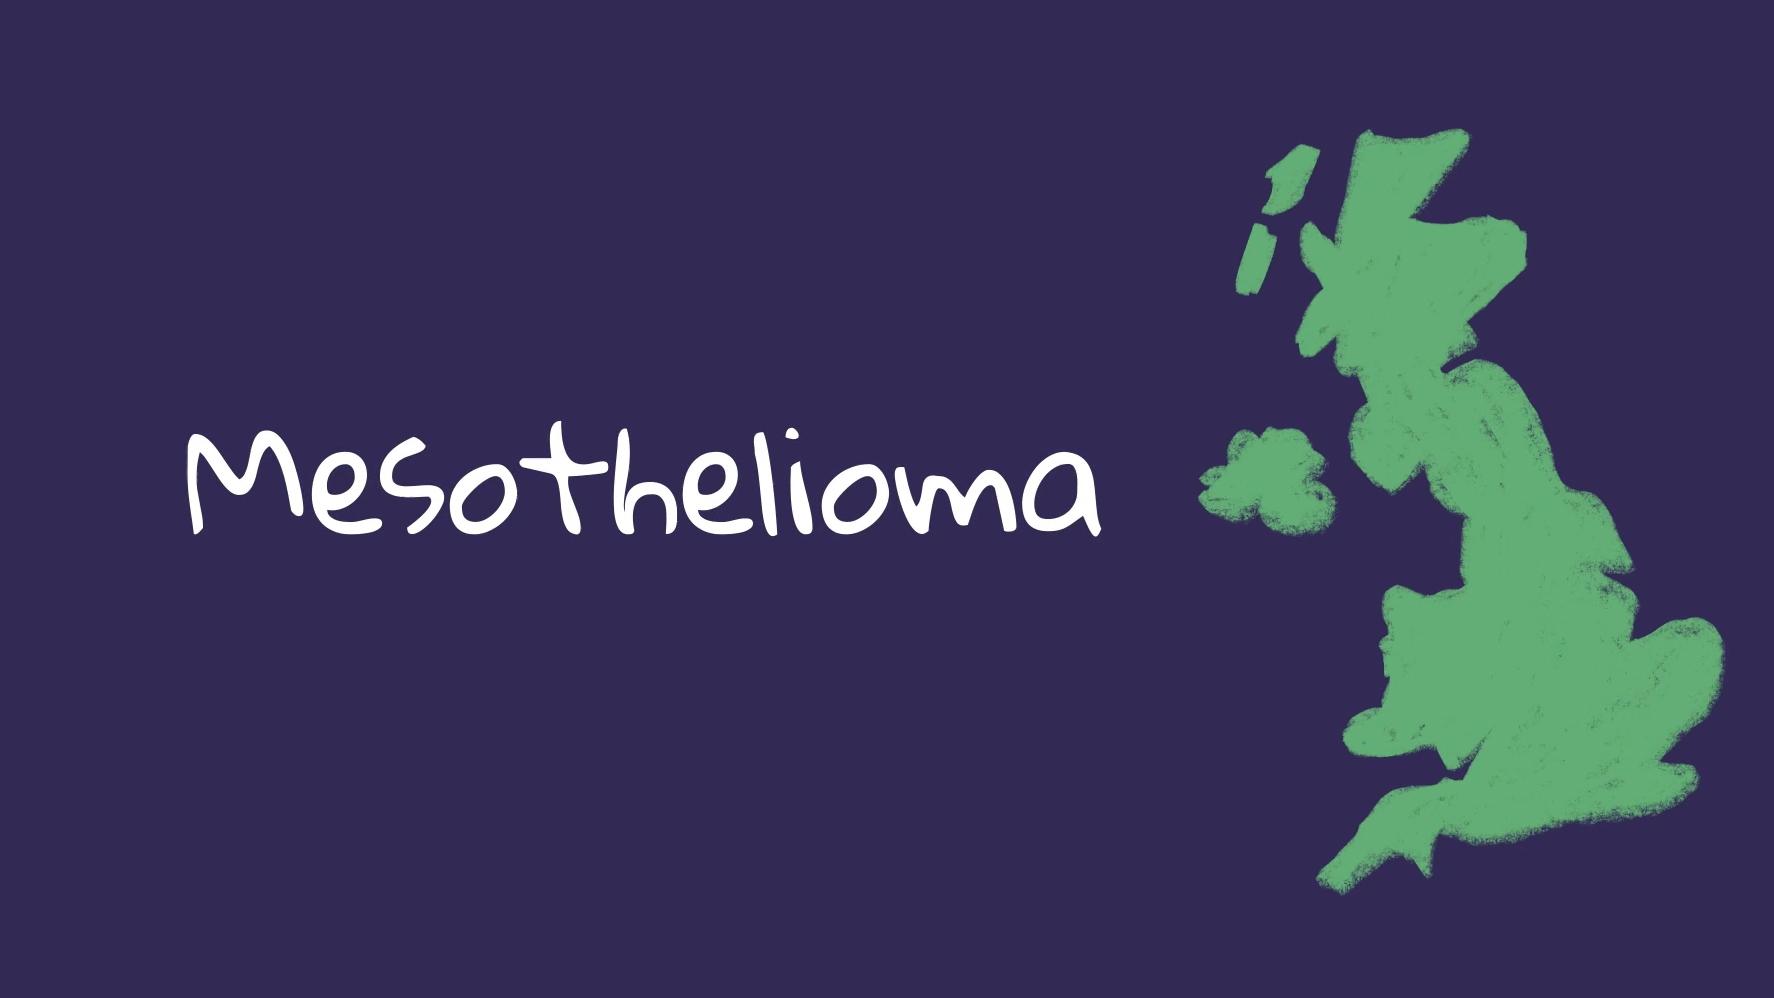 Illustration of the UK overlaid with the word "mesothelioma"